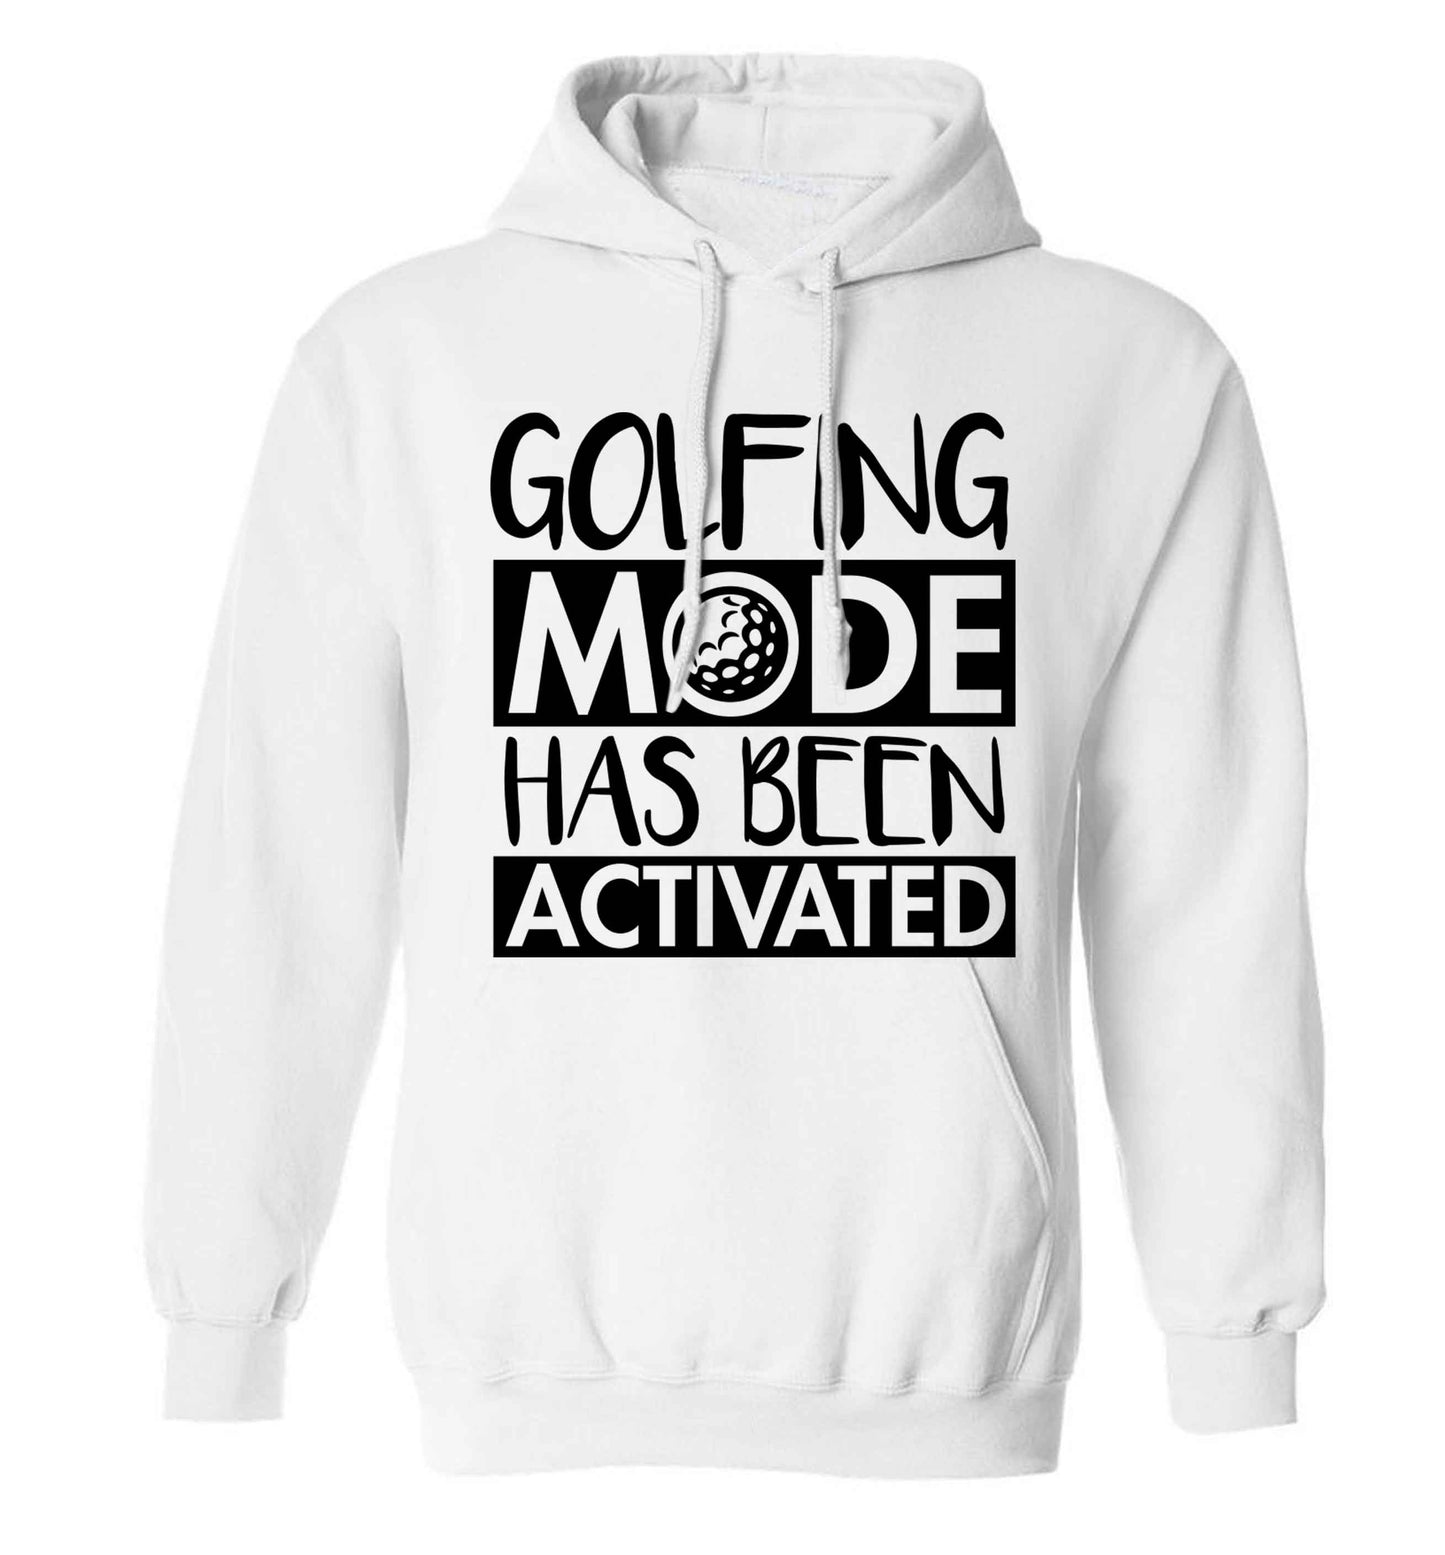 Golfing mode has been activated adults unisex white hoodie 2XL